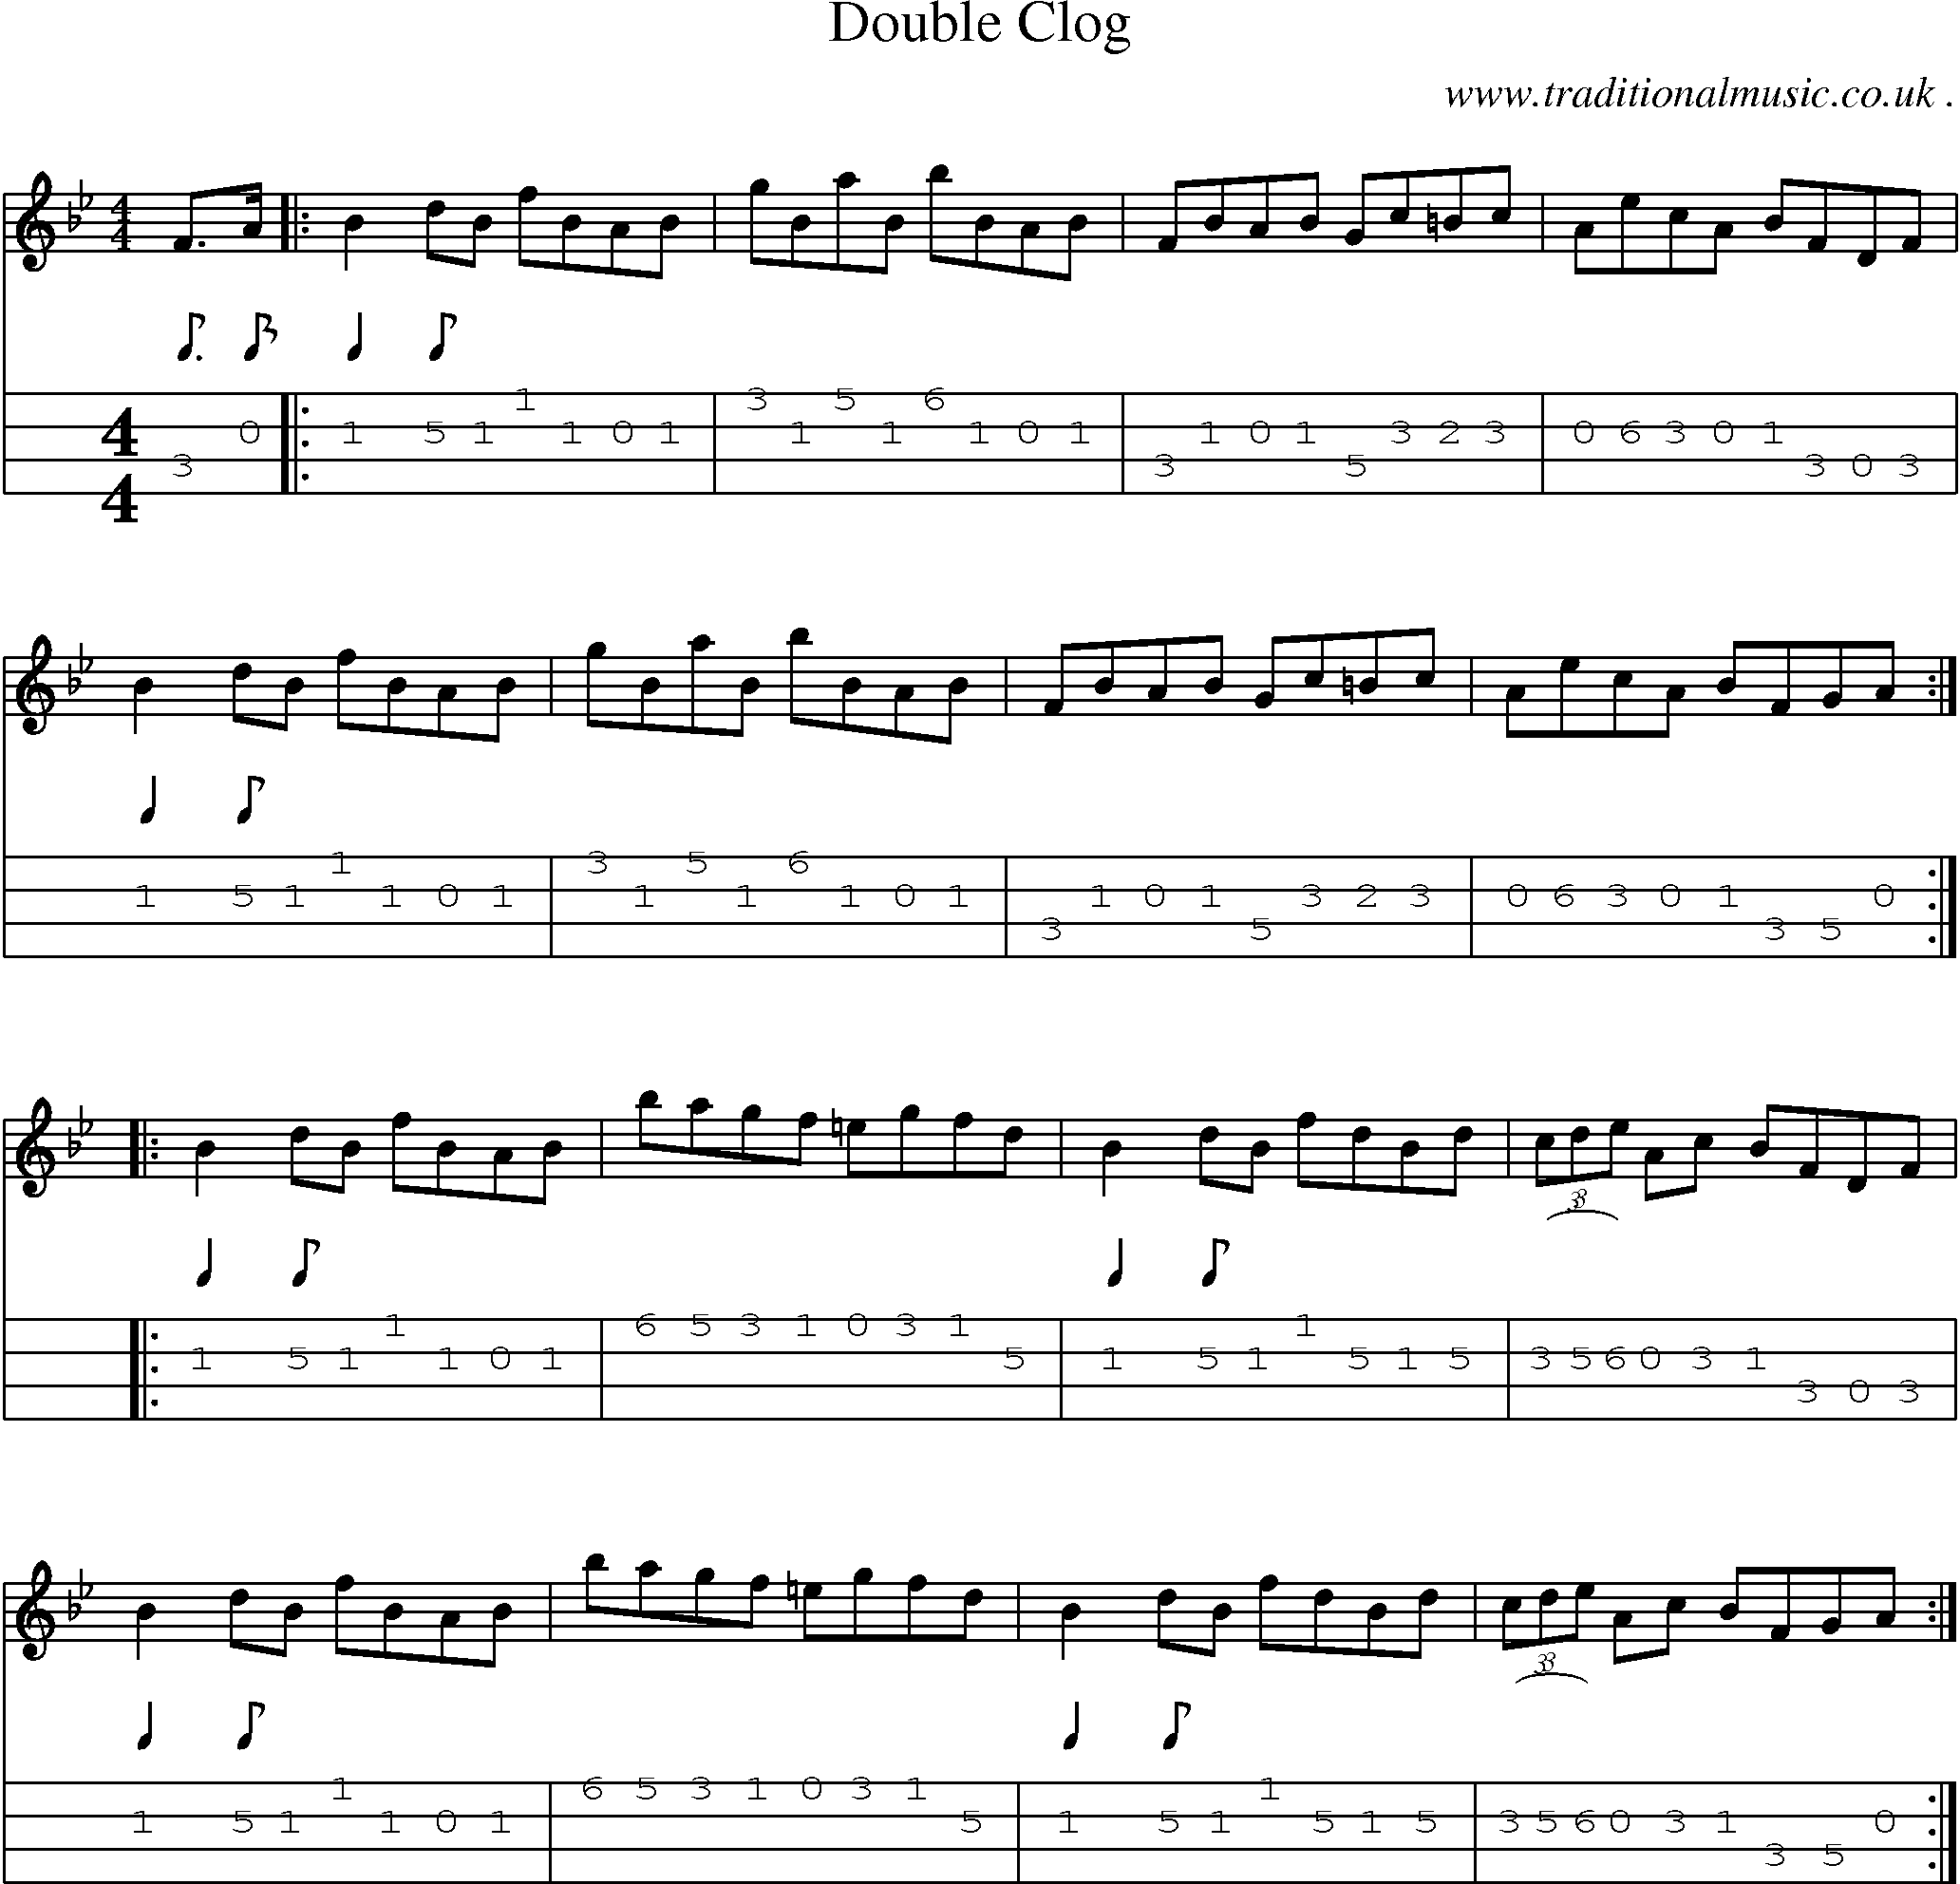 Music Score and Guitar Tabs for Double Clog